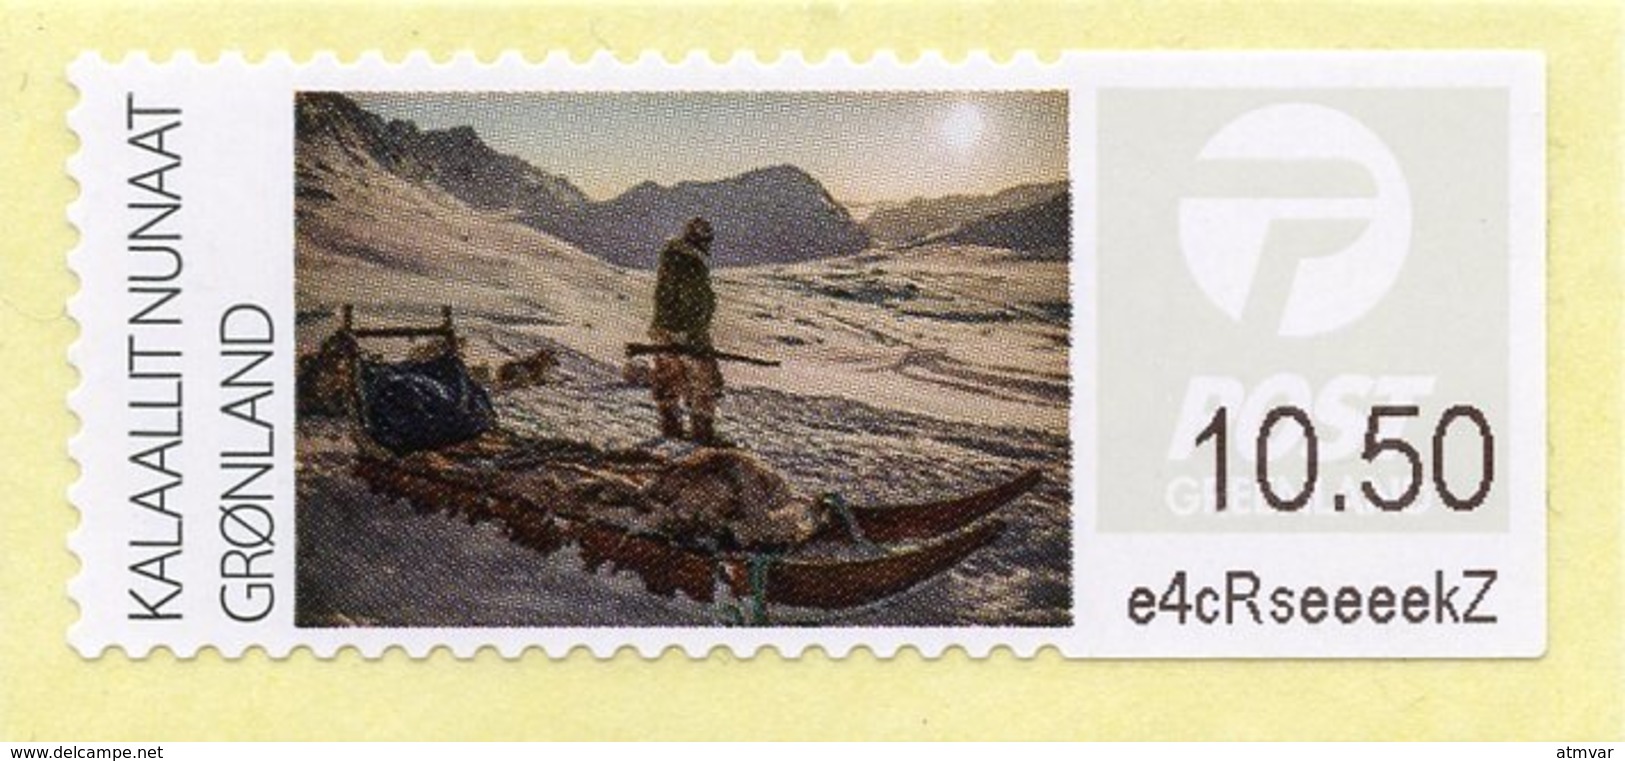 GREENLAND / GROENLAND (2016) - ATM - Greenlandic Scenery - Chasse Polaire, Hunting - Timbres De Distributeurs